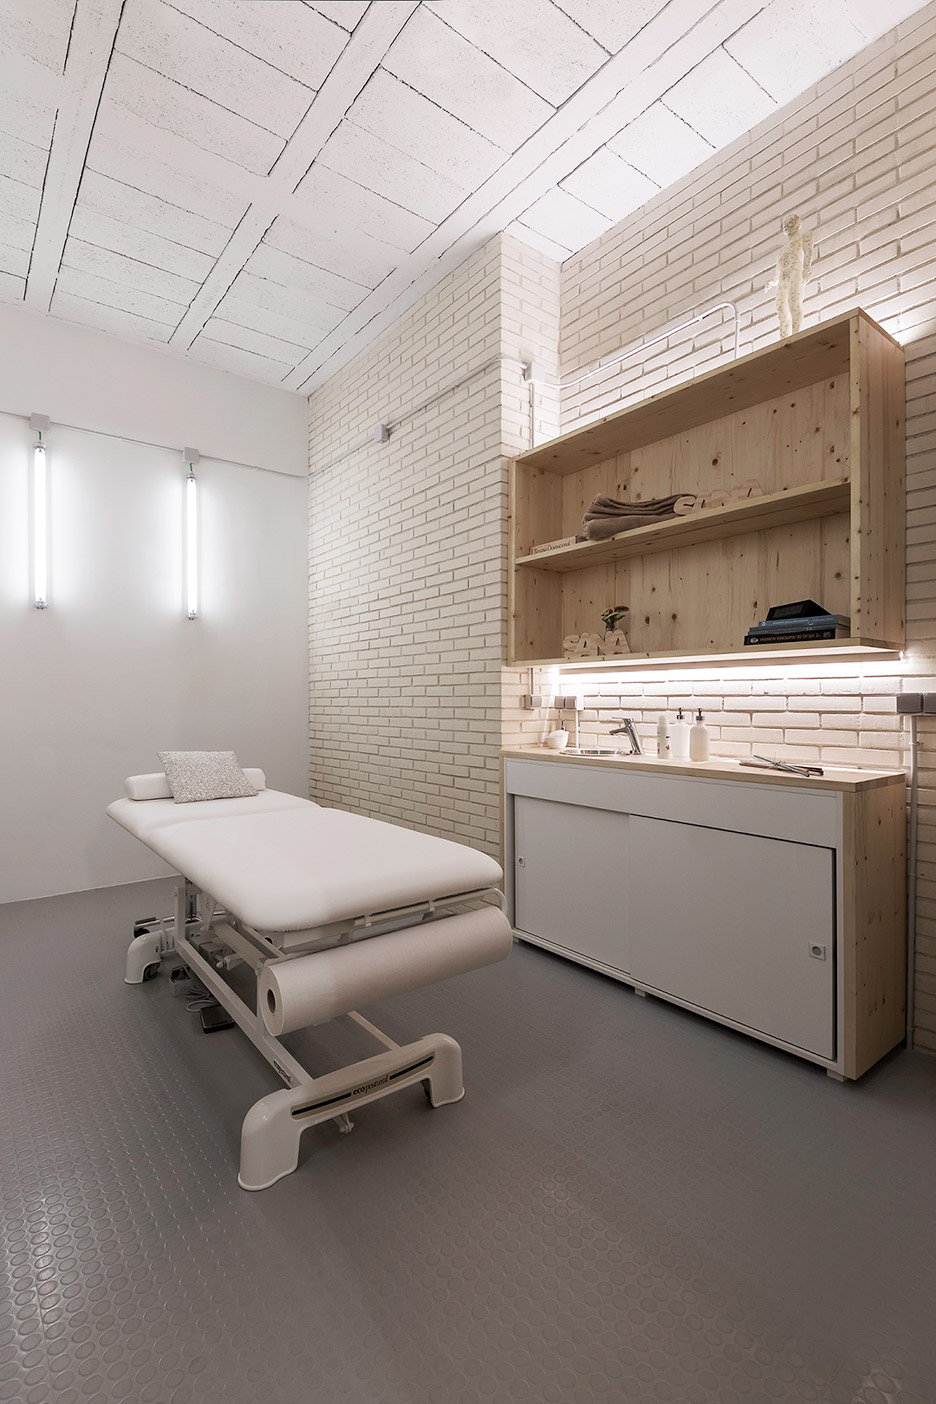 Nan Arquitectos Selects Pale Palette To Relax Visitors At SanaSana Physiotherapy Centre